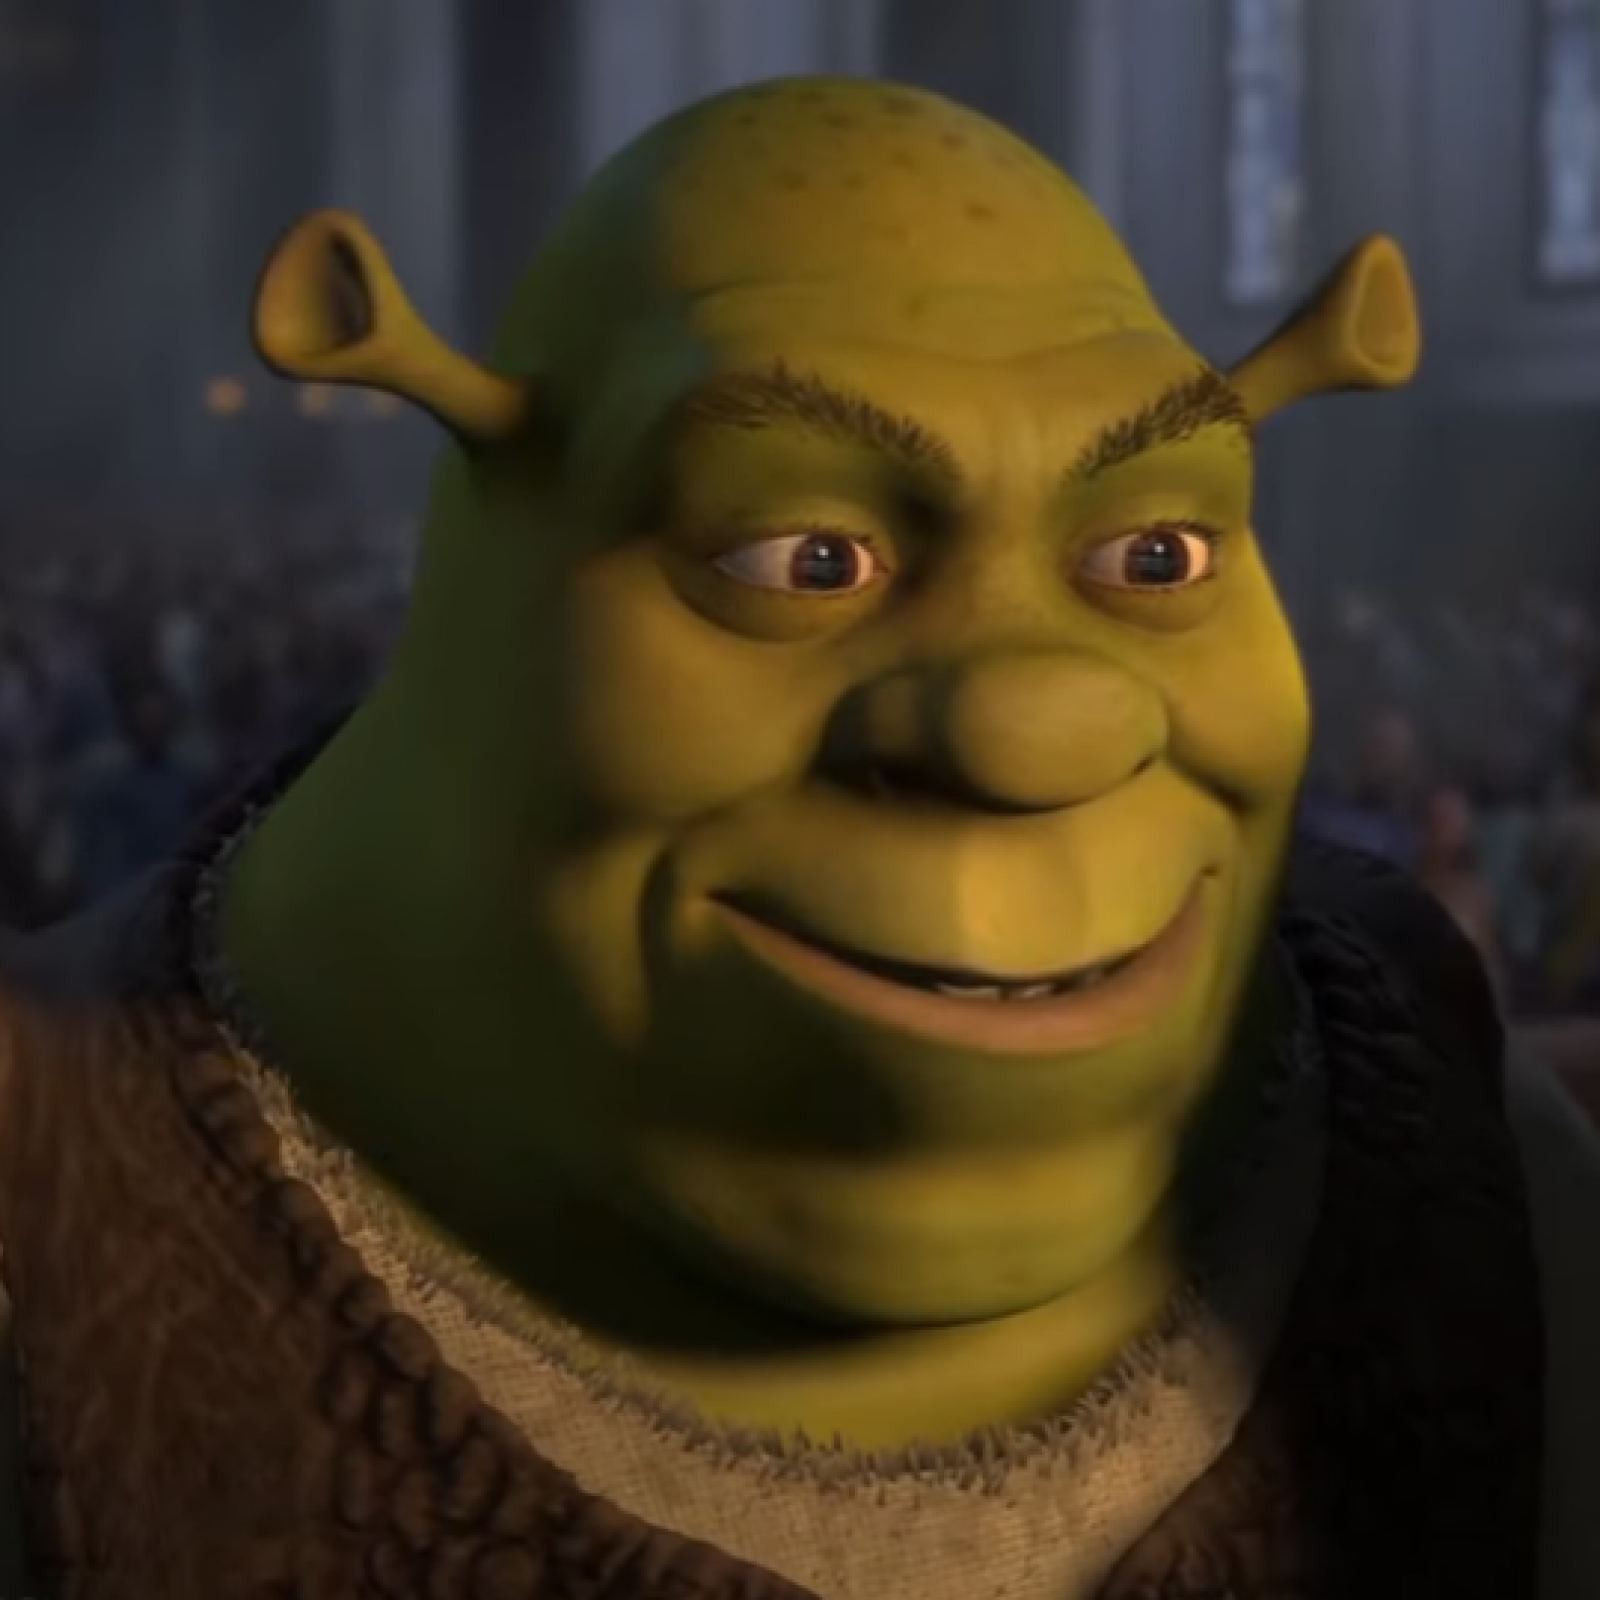 Man Teaches Robot to Write Out Entire 'Shrek' Film, Fans Ask 'Why?